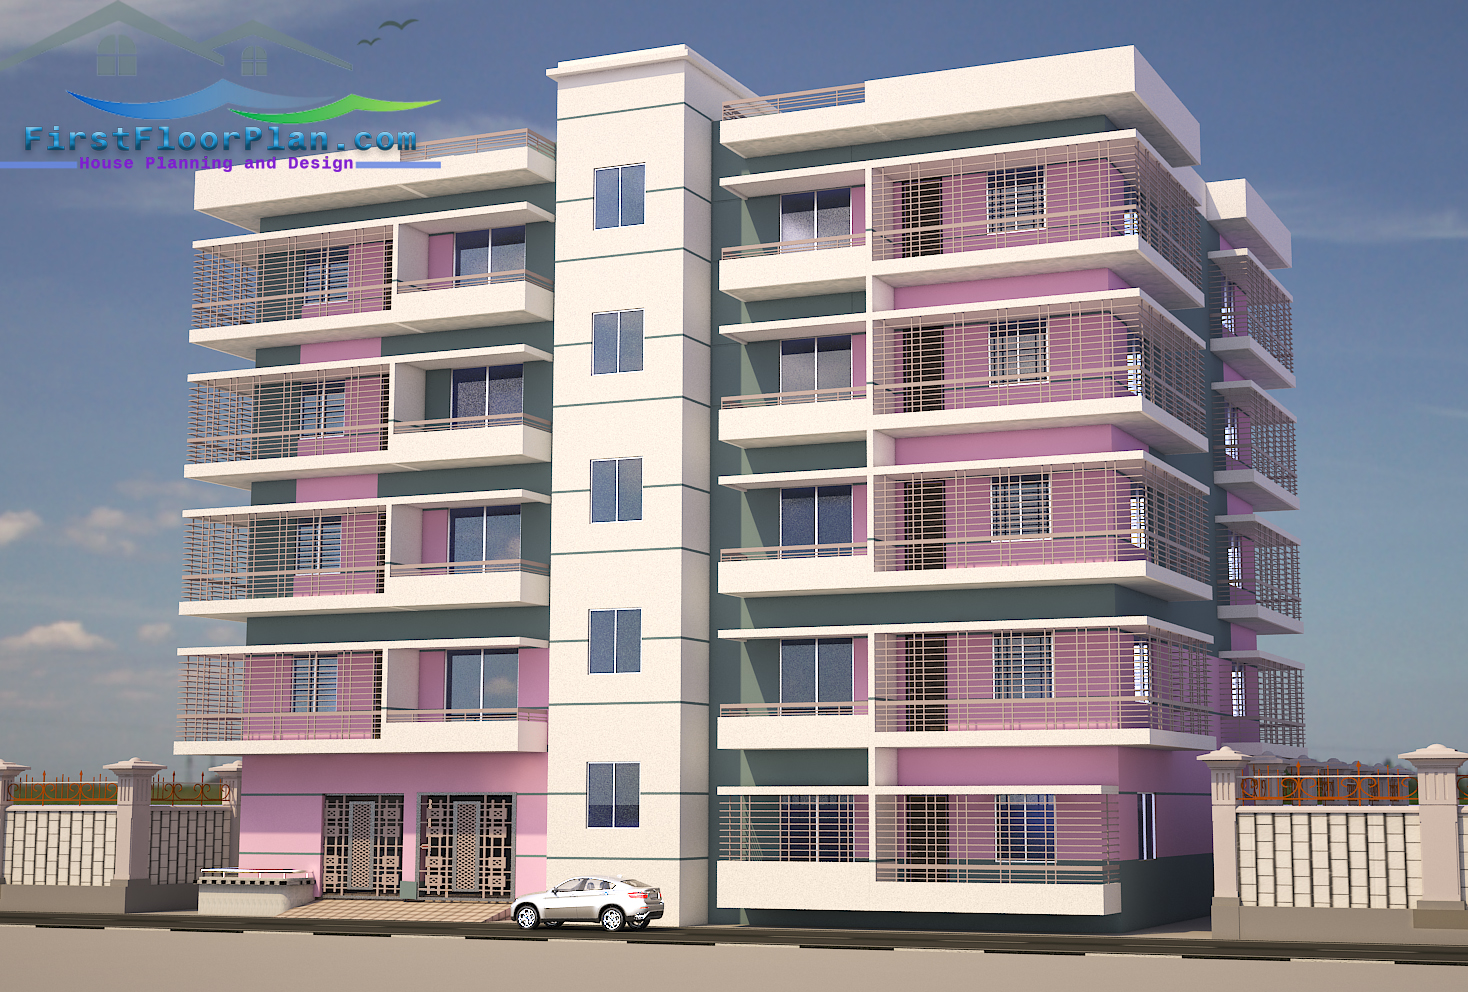 5 storey building design with plan | 3500 SQ FT - First Floor Plan